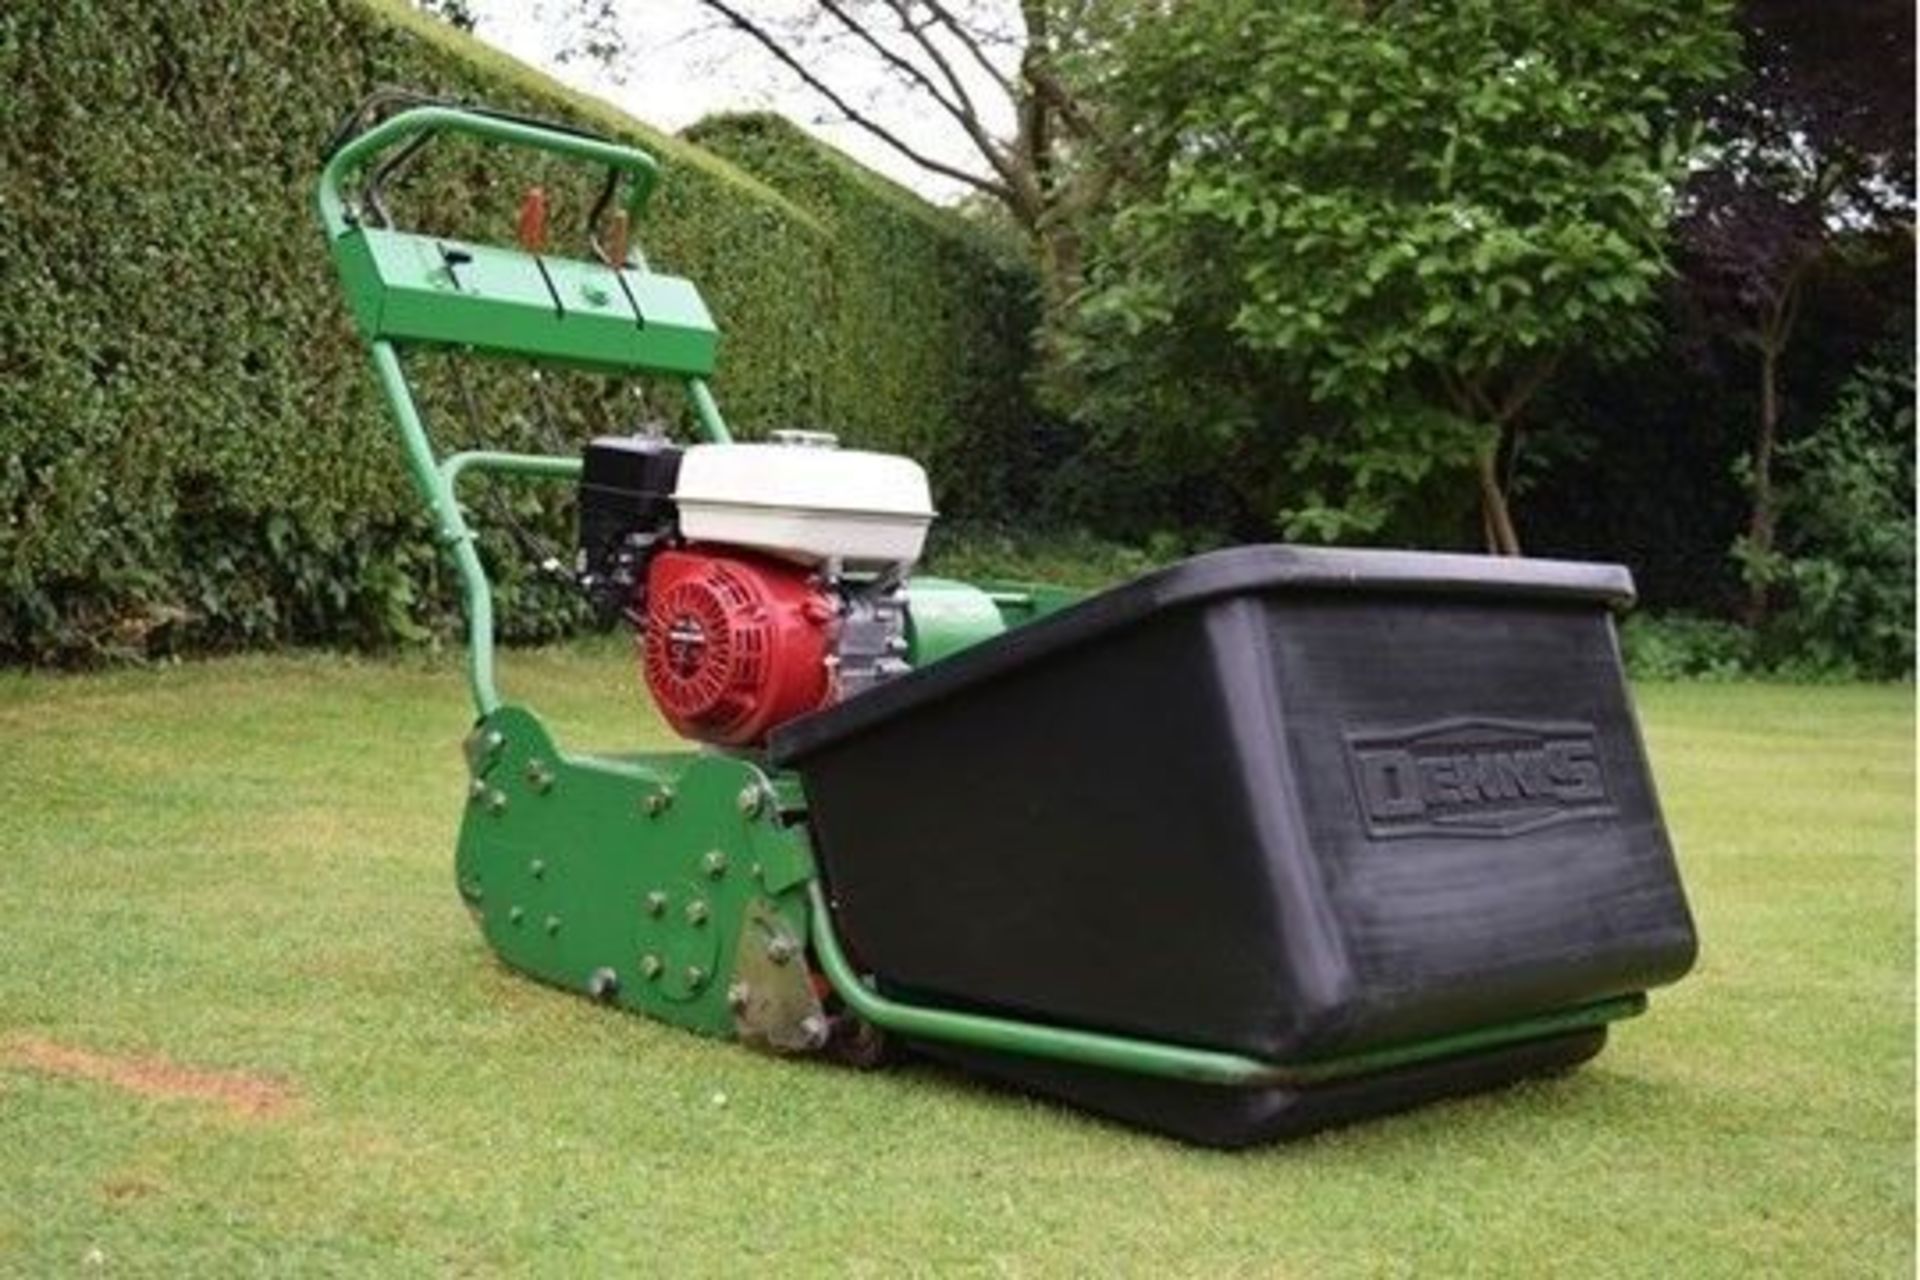 2004 Dennis G560 5 Blade Cylinder Mower With Grass Box - Image 4 of 11